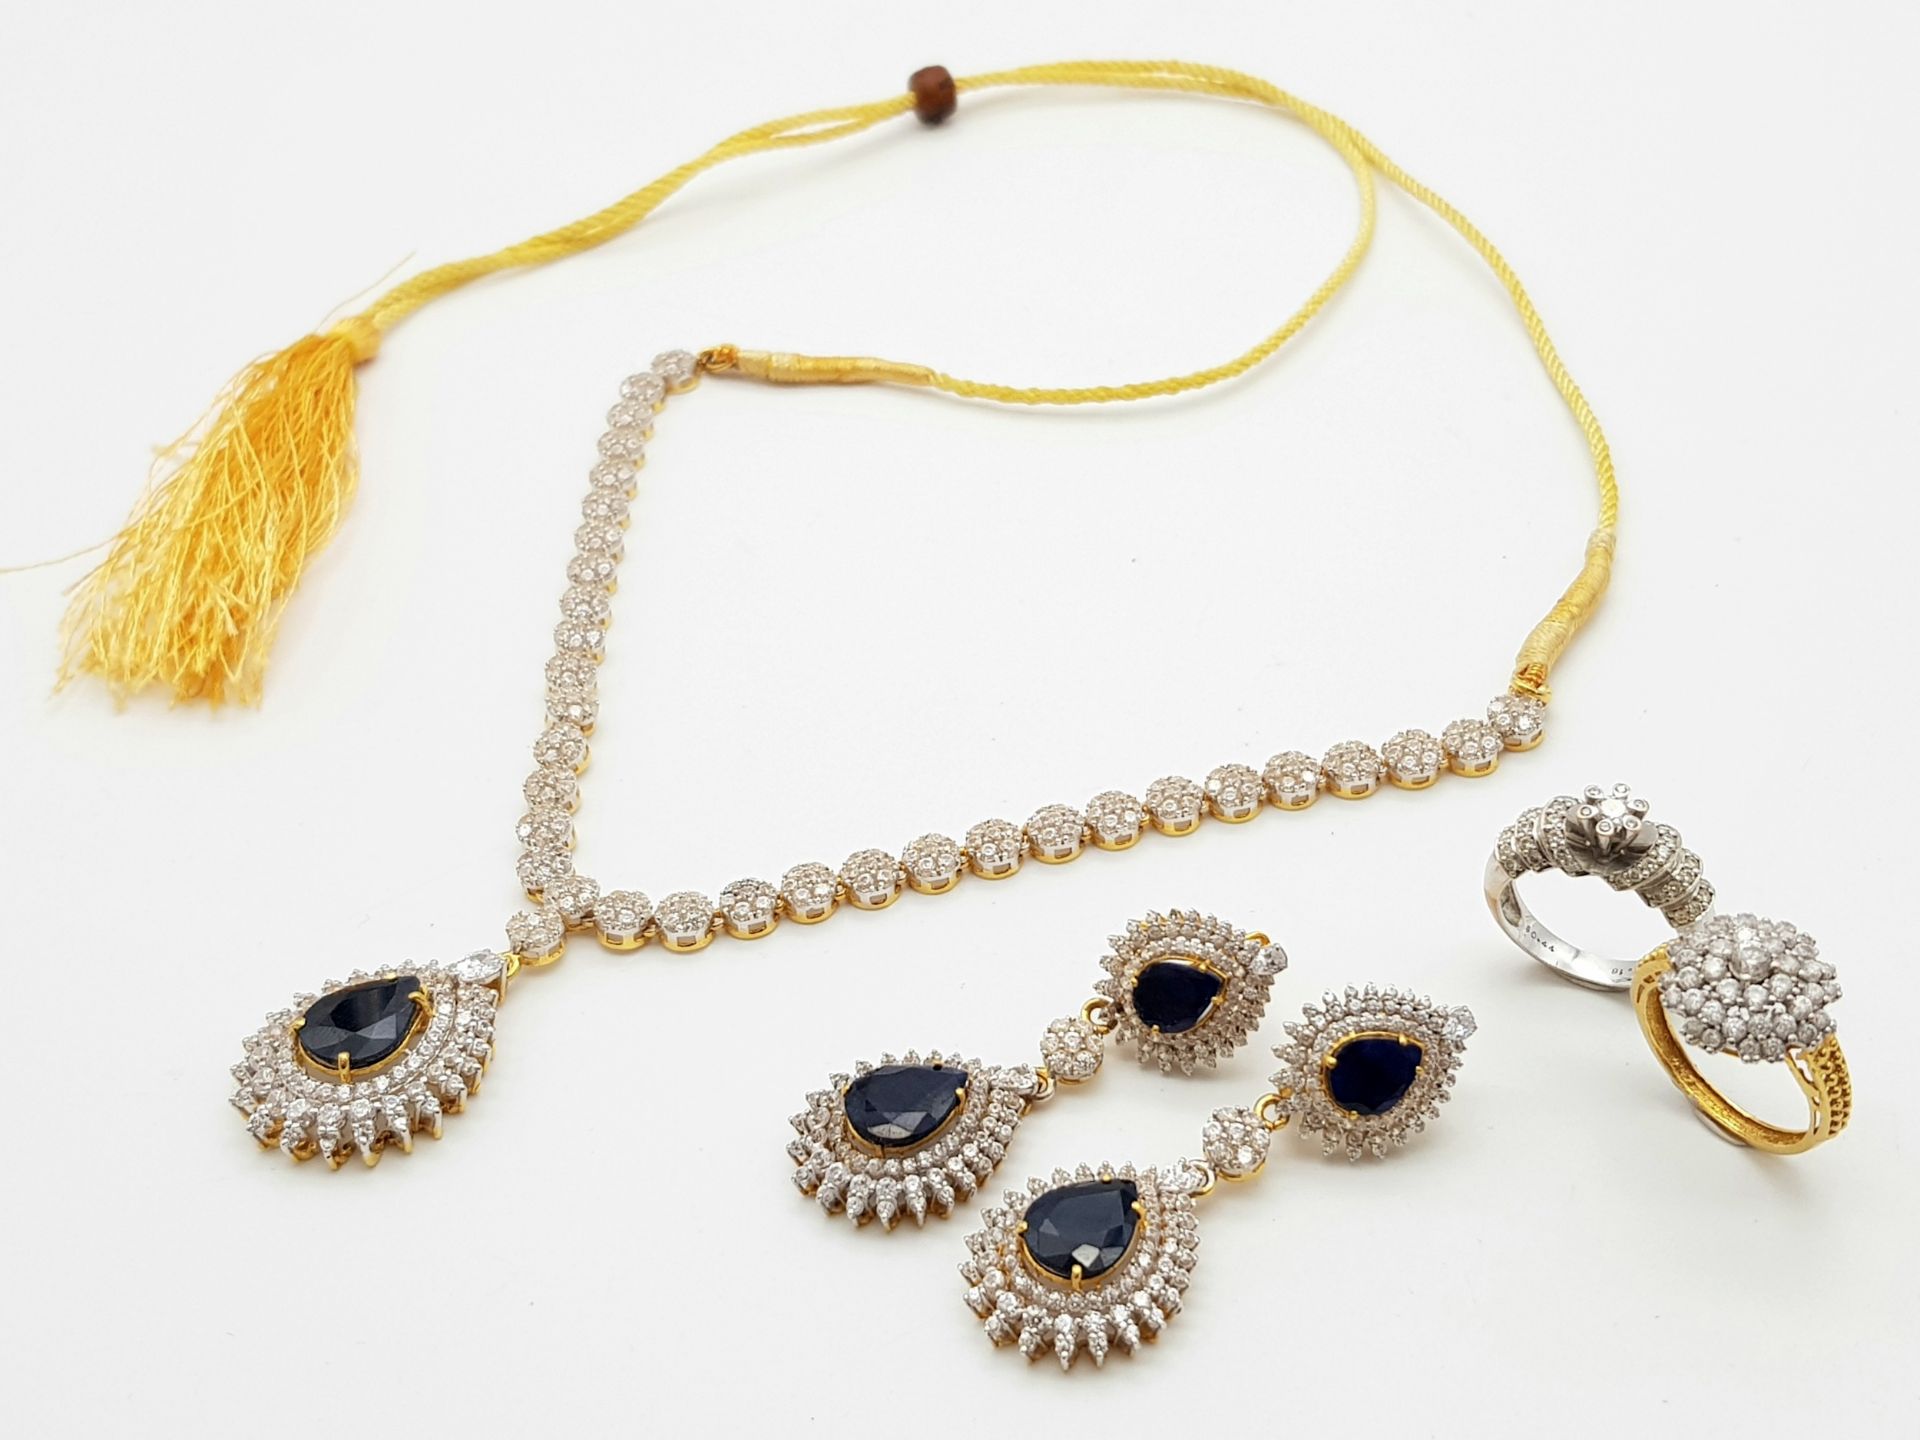 A Fabulous Jewellery Lot! A 21K Rich Yellow Gold Diamond and White Stone (one missing) Necklace with